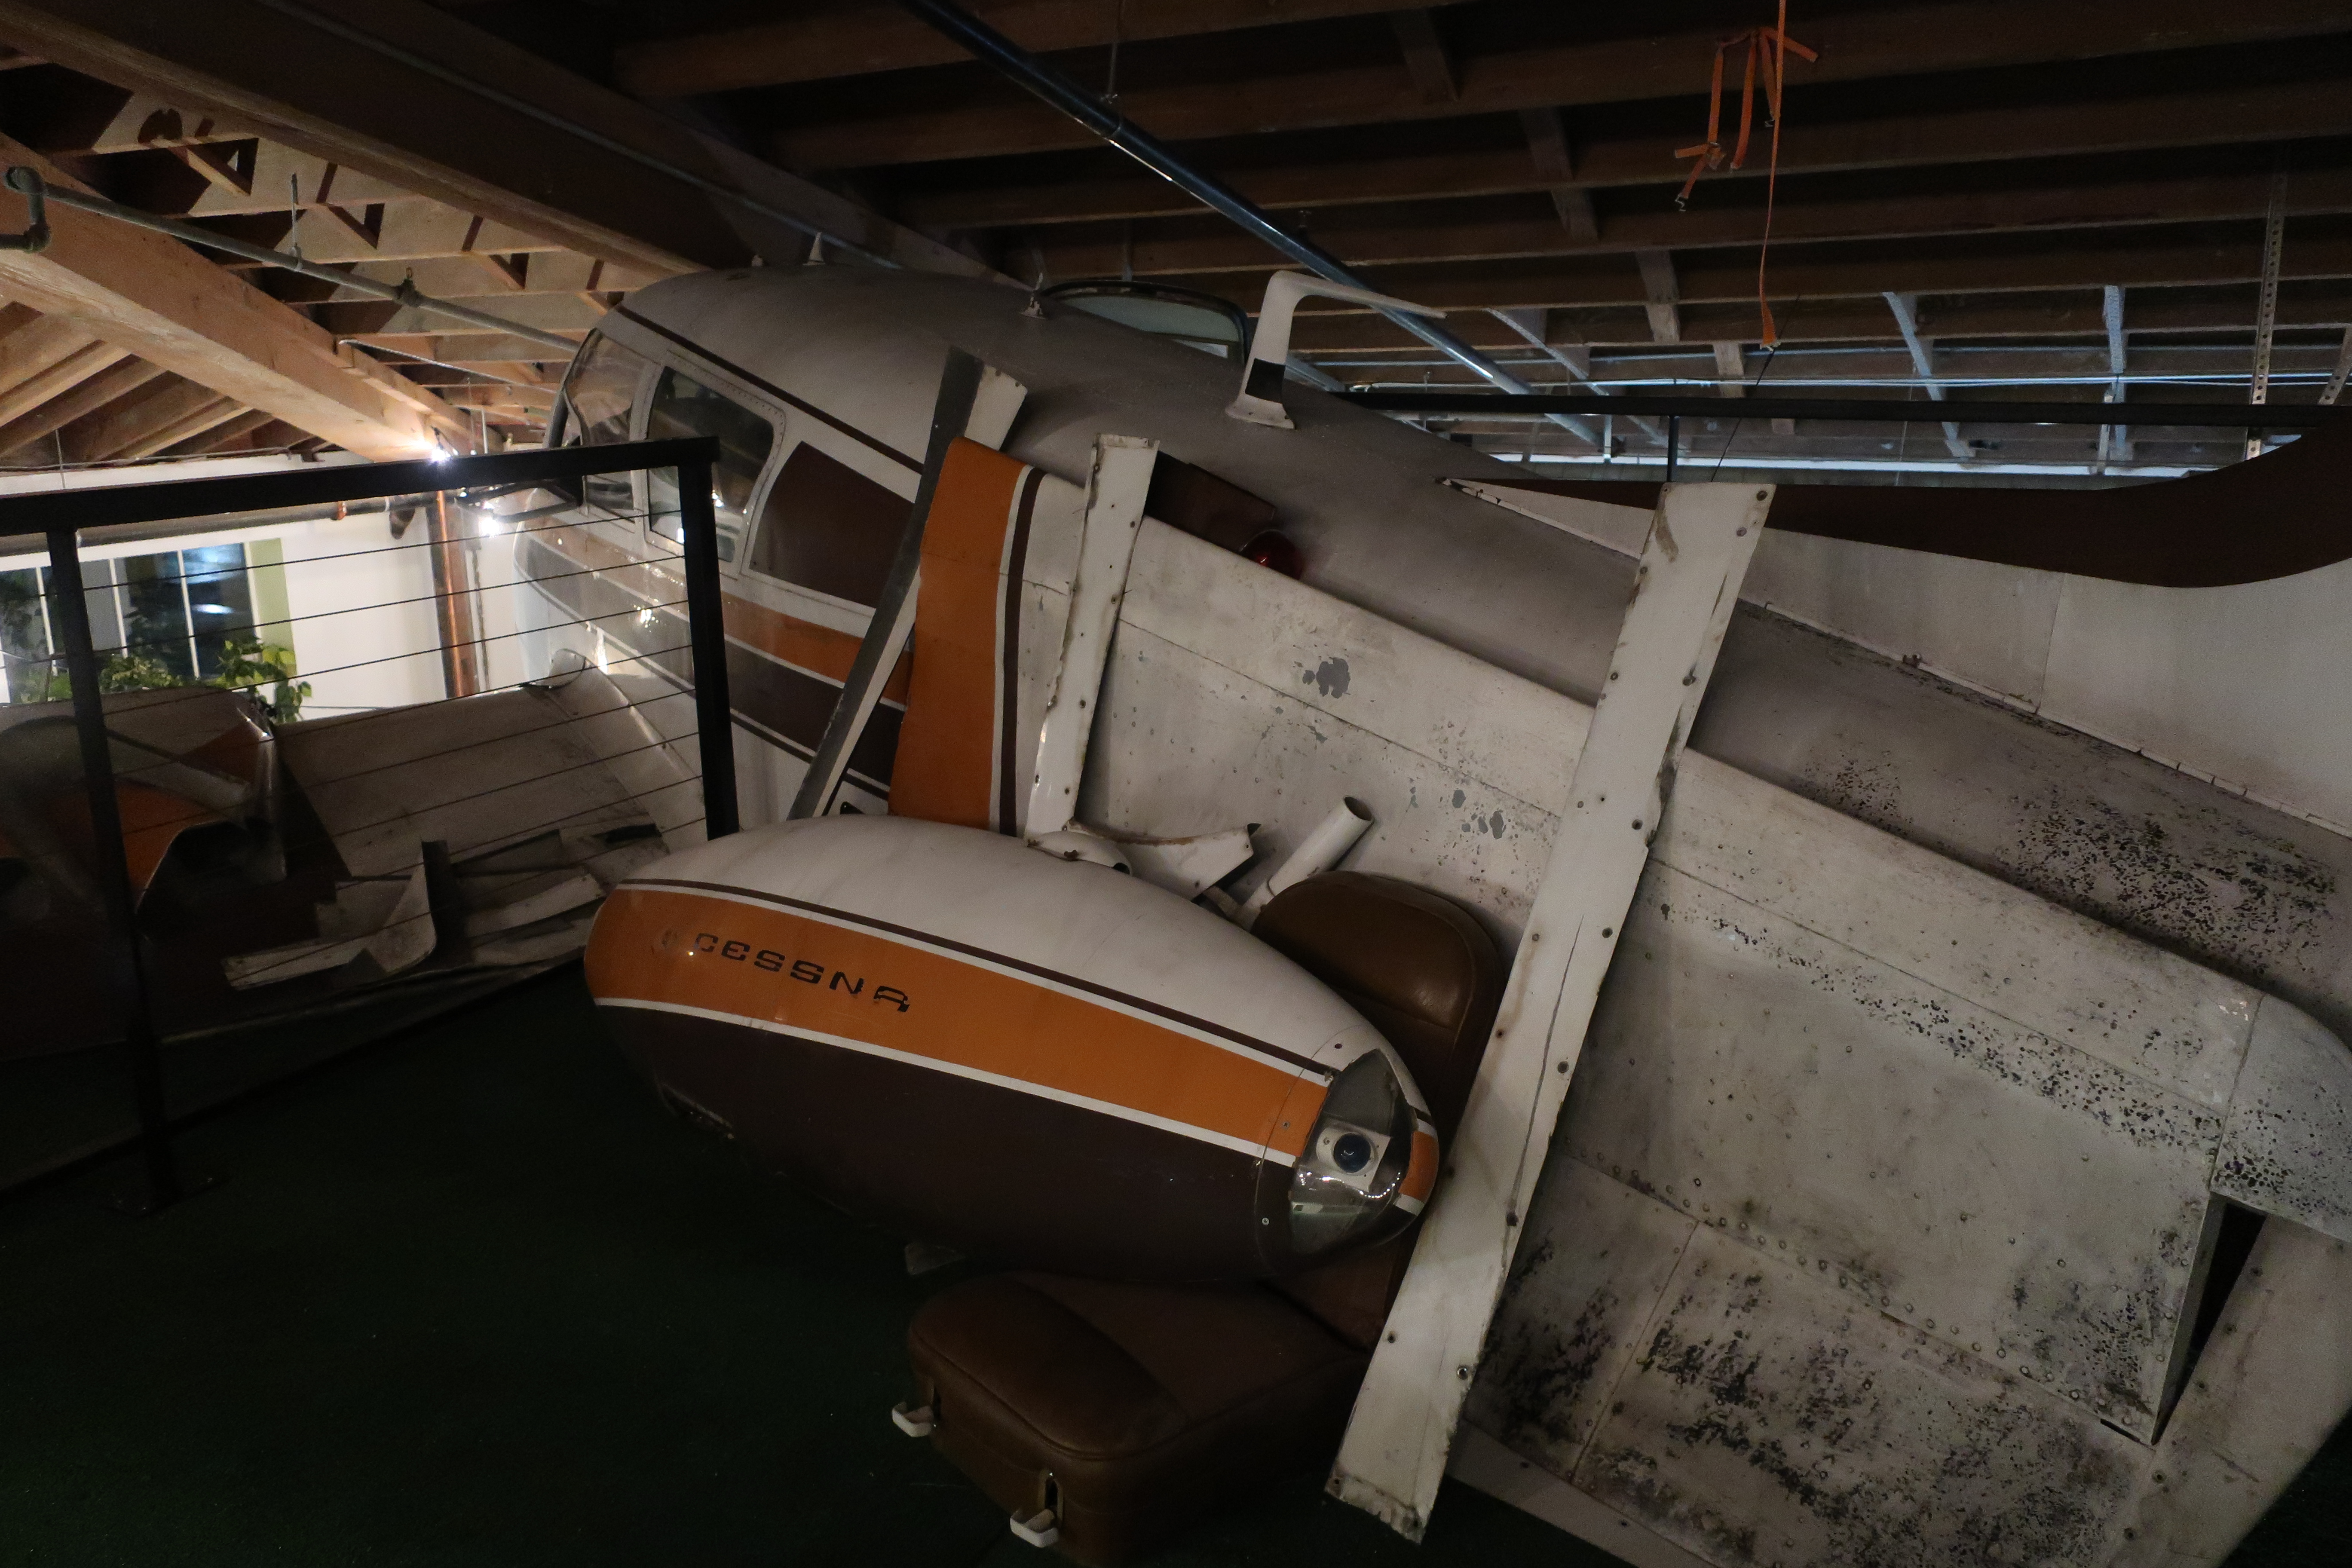 Soon patrons will be able to go inside the cockpit of the 1958 Cessna 310B on display inside Vagabond Brewing Portland.